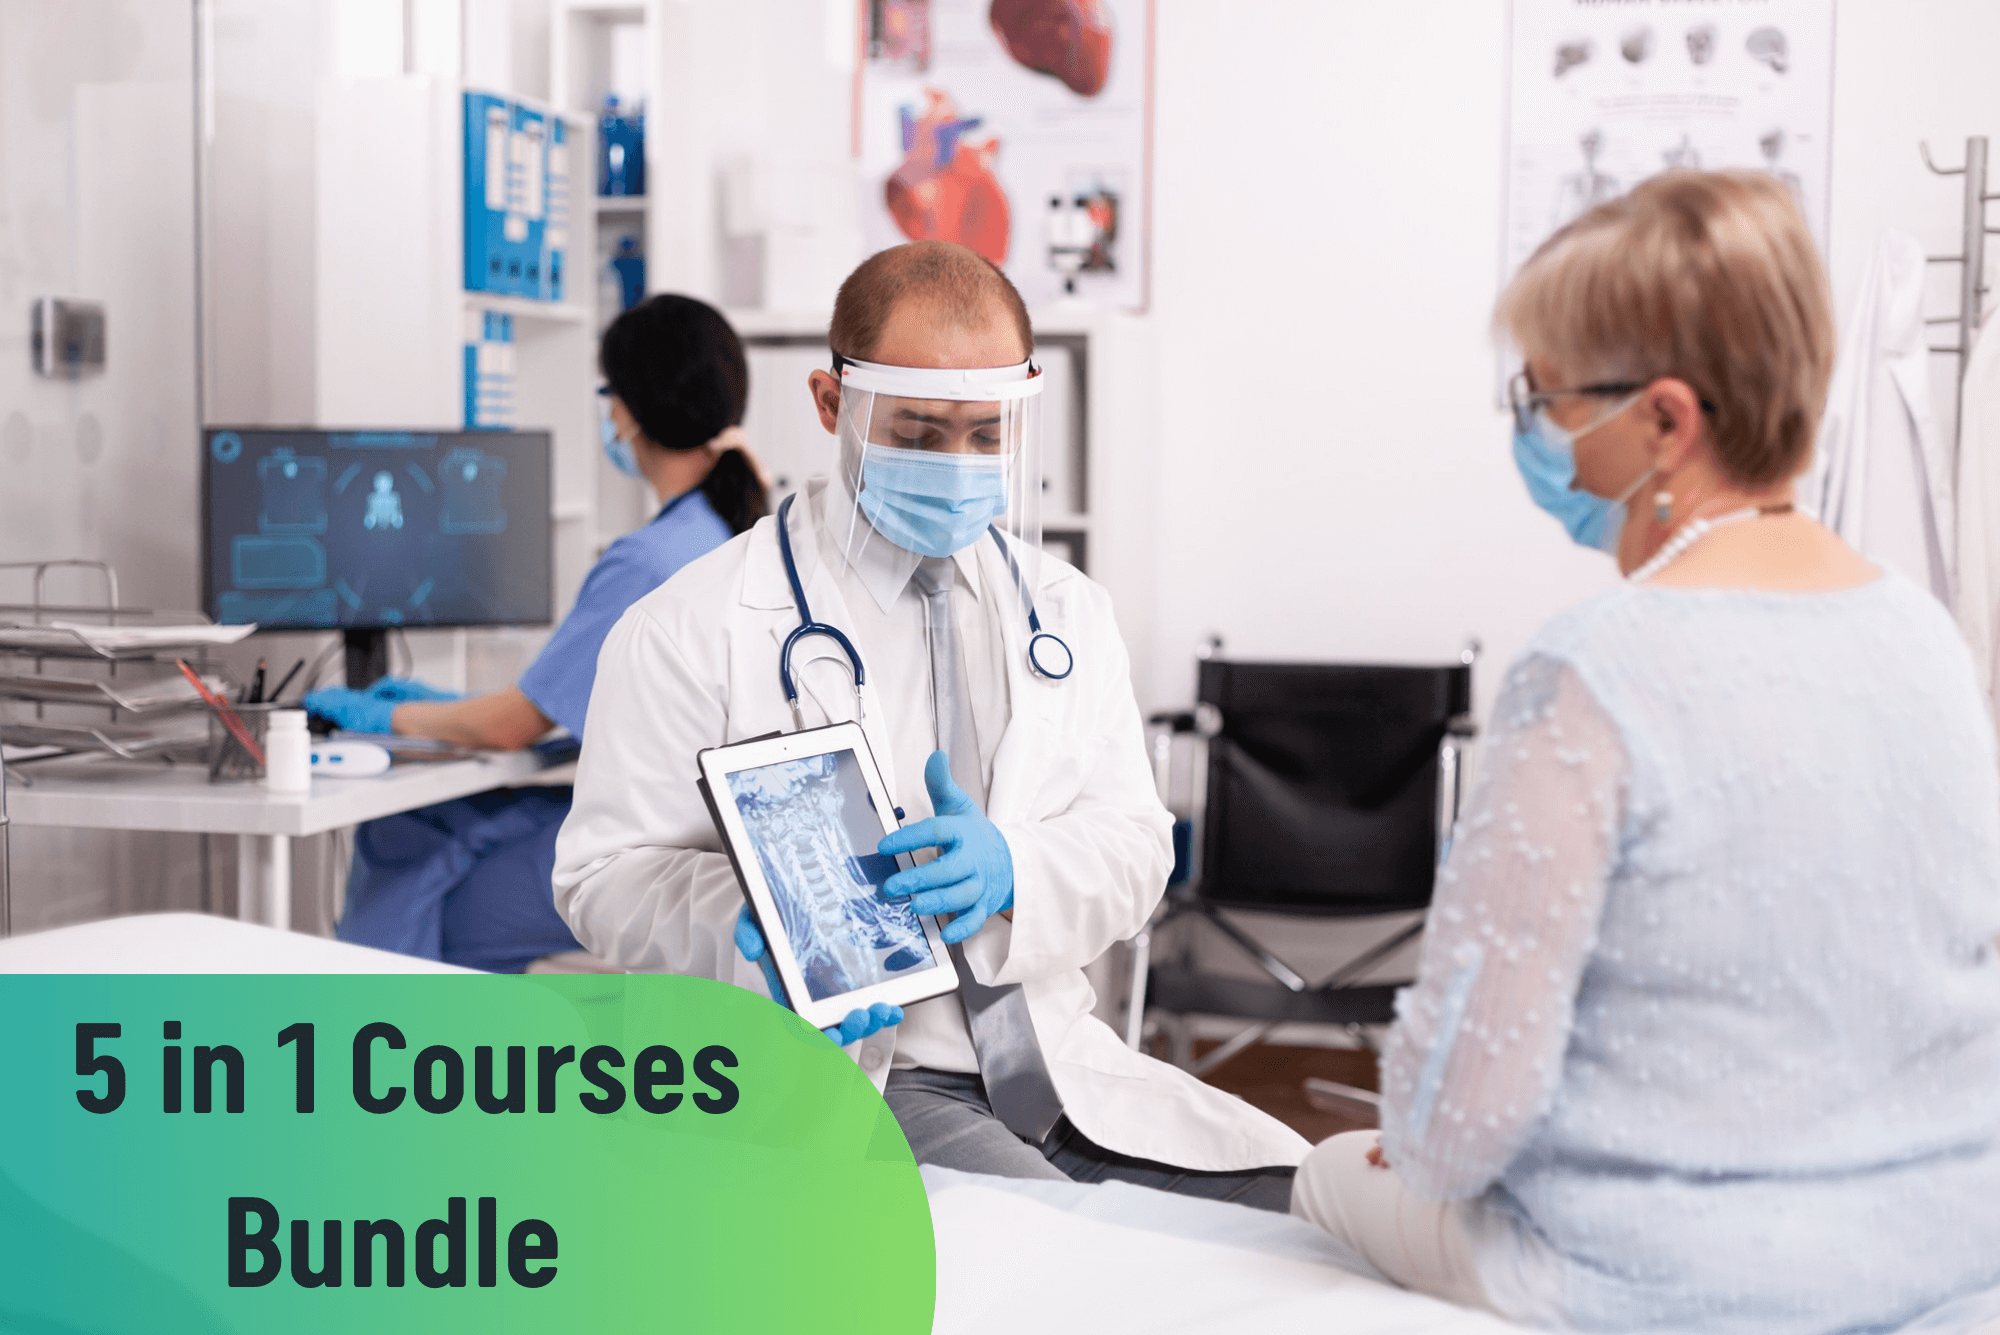 Clinical Coding, Medical Transcription, Anatomy and Physiology Training